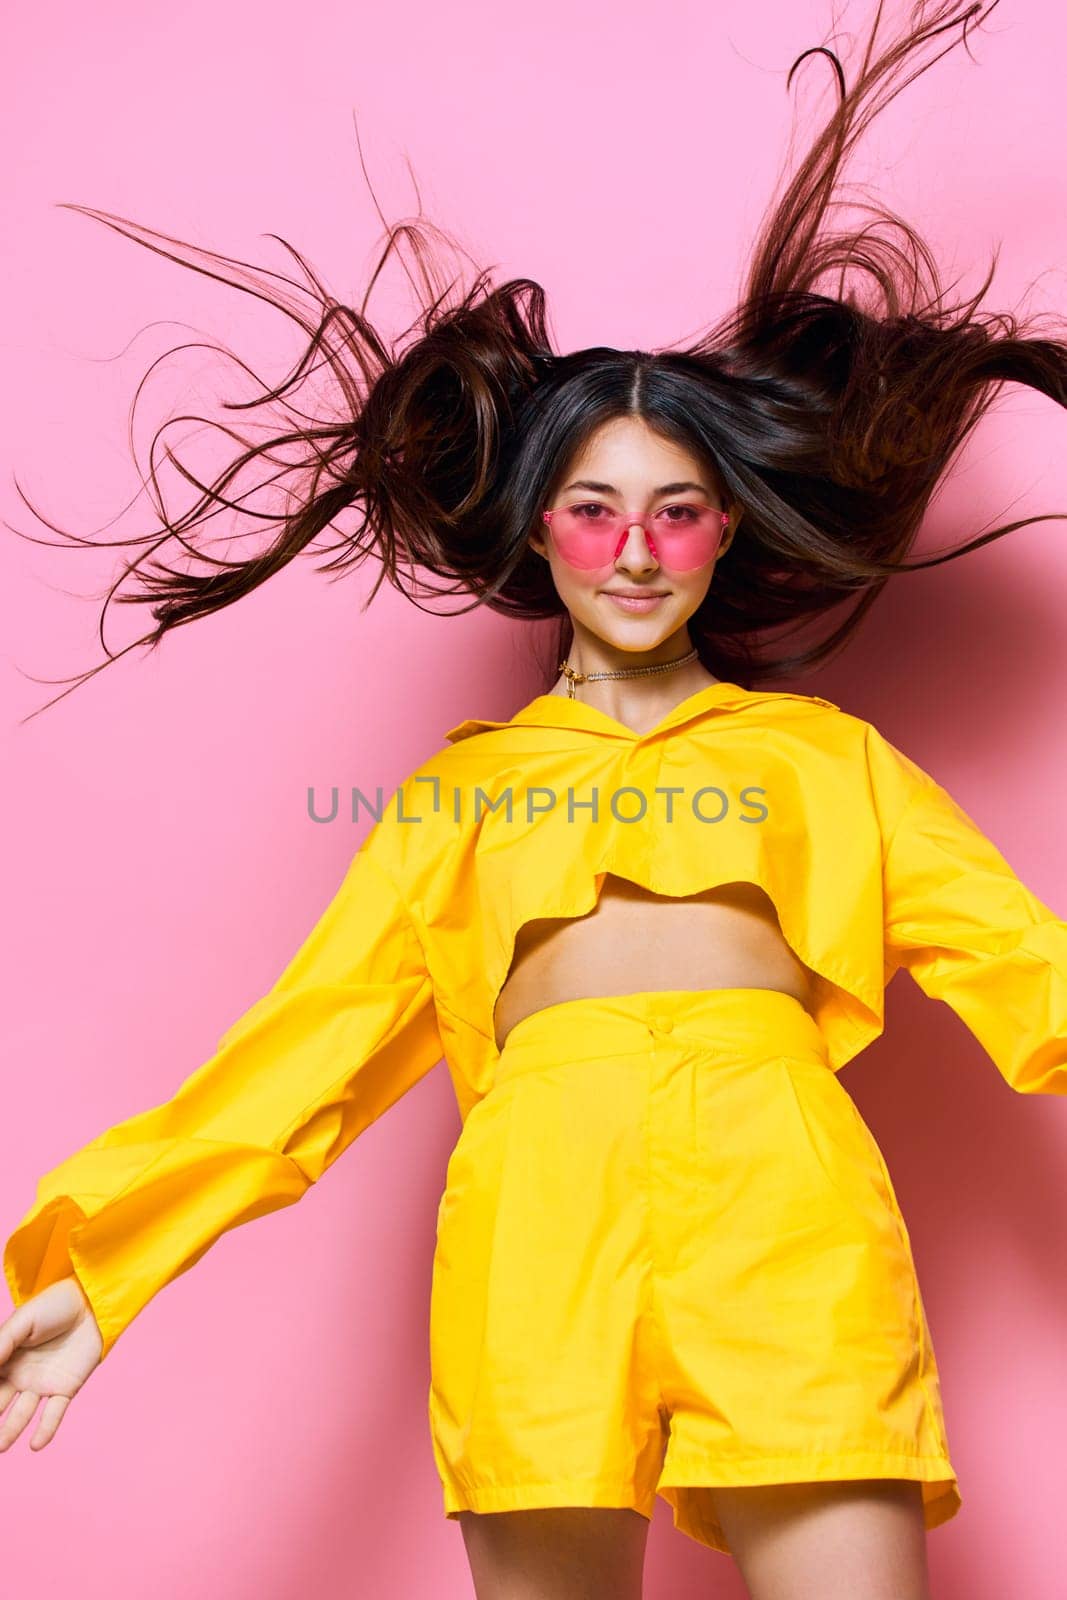 sunglasses woman cheerful beautiful attractive lifestyle young girl trendy yellow fashion by SHOTPRIME